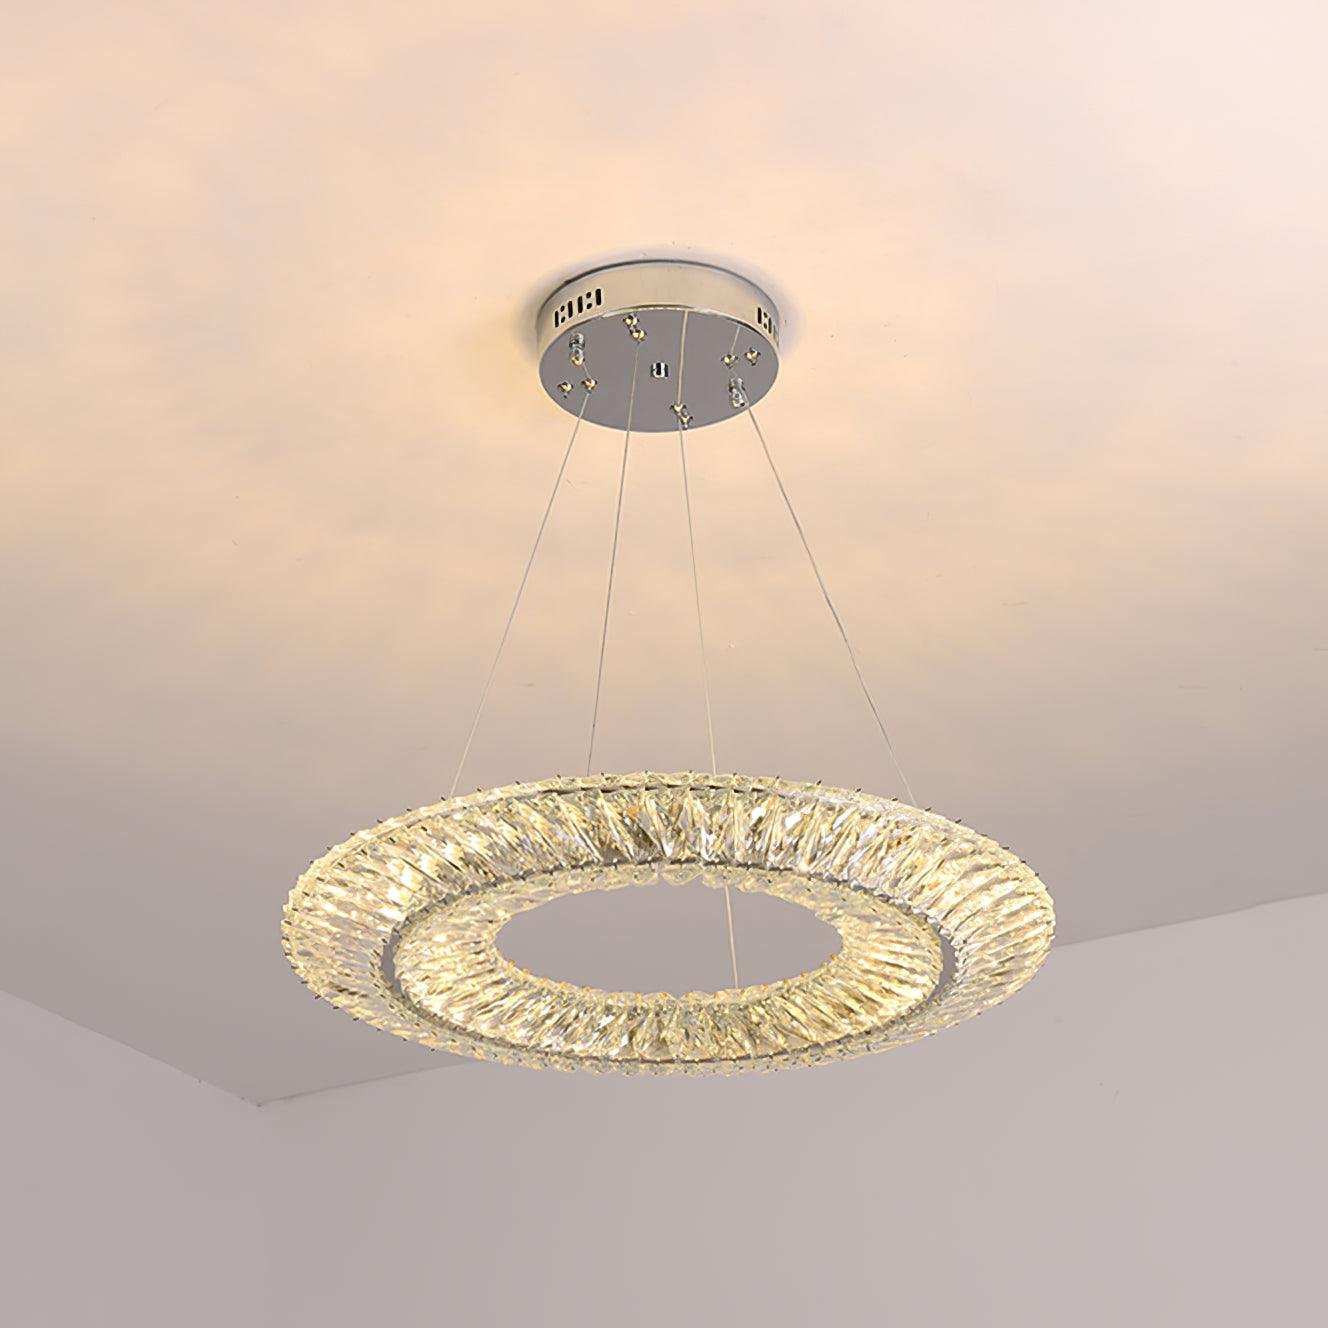 Silver Tanager Geometric Chandelier with Cool White Light, measuring approximately 23.6 inches in diameter and 59 inches in height (60cm x 150cm)